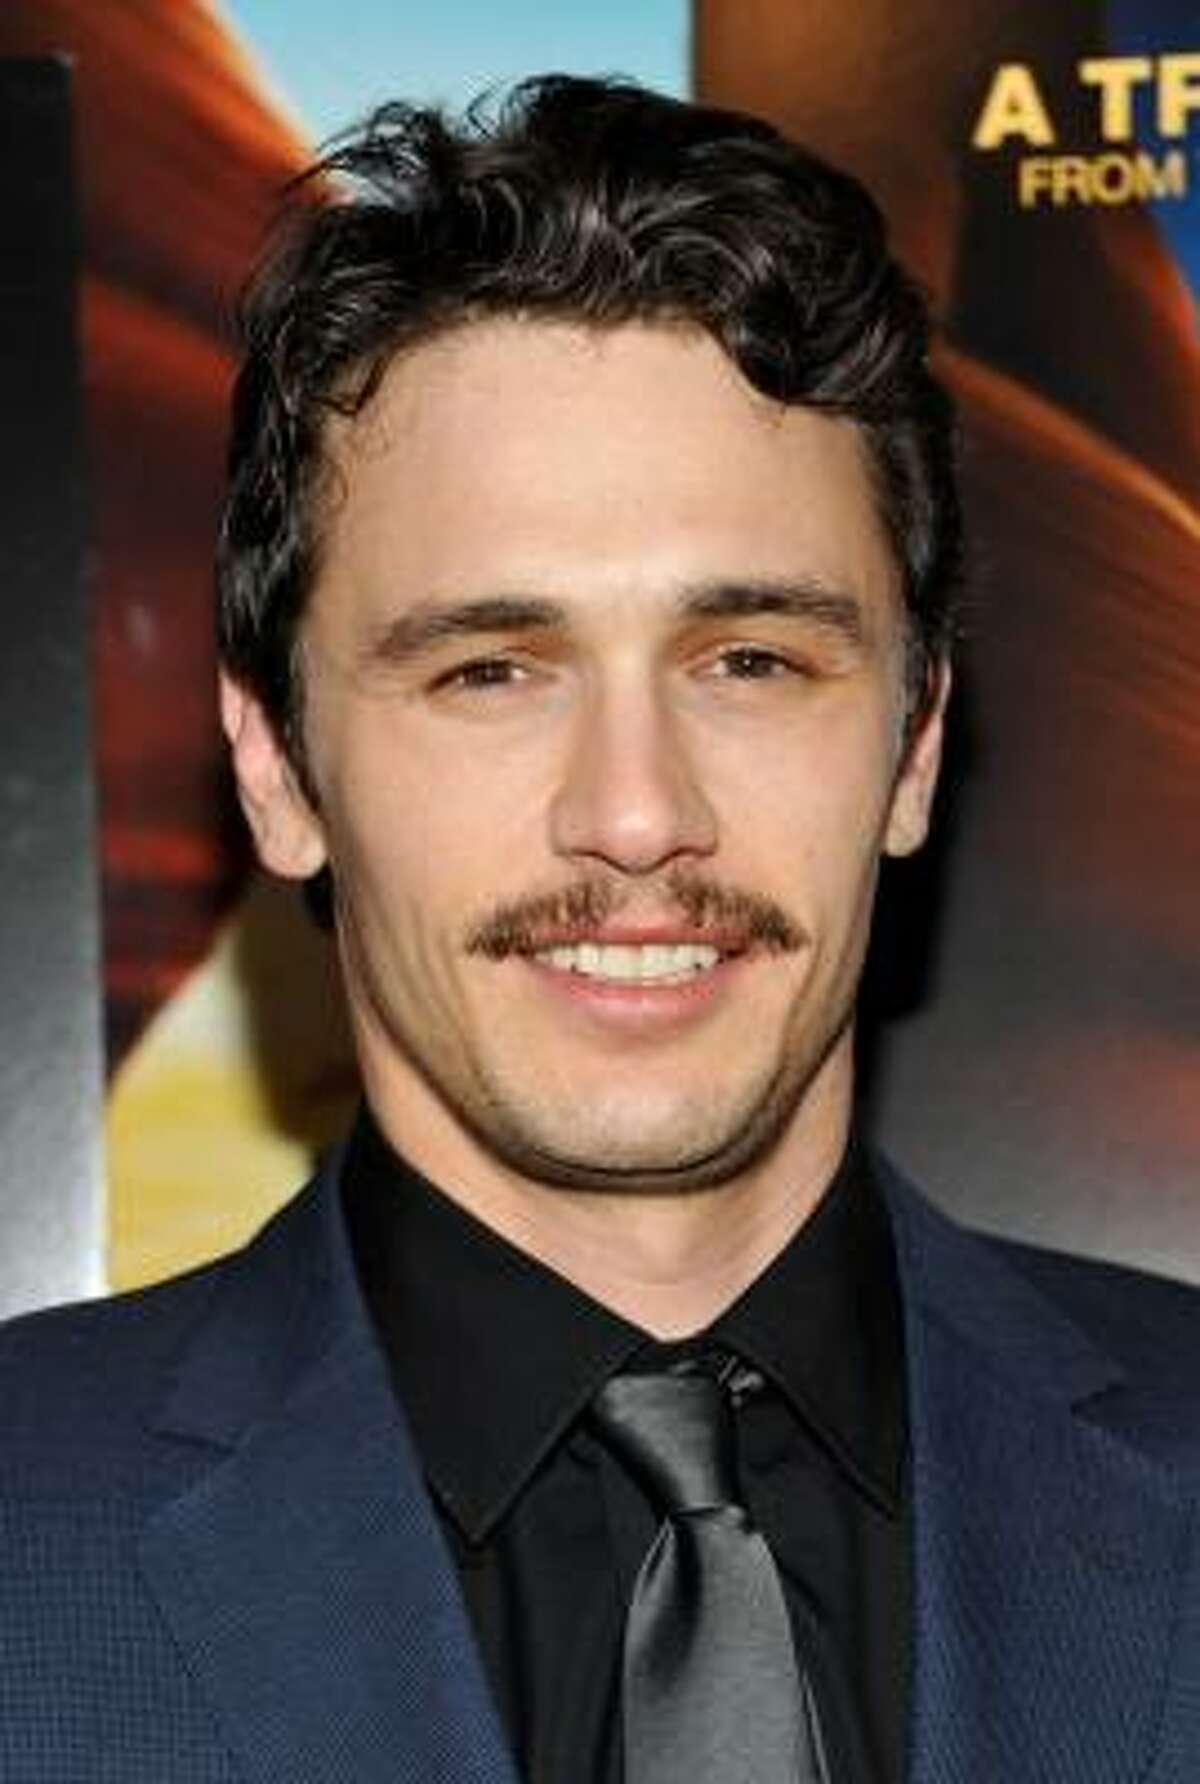 In this Nov. 2, 2010, file photo, actor James Franco attends the "127 Hours" film premiere at Chelsea Clearview Cinema in New York.